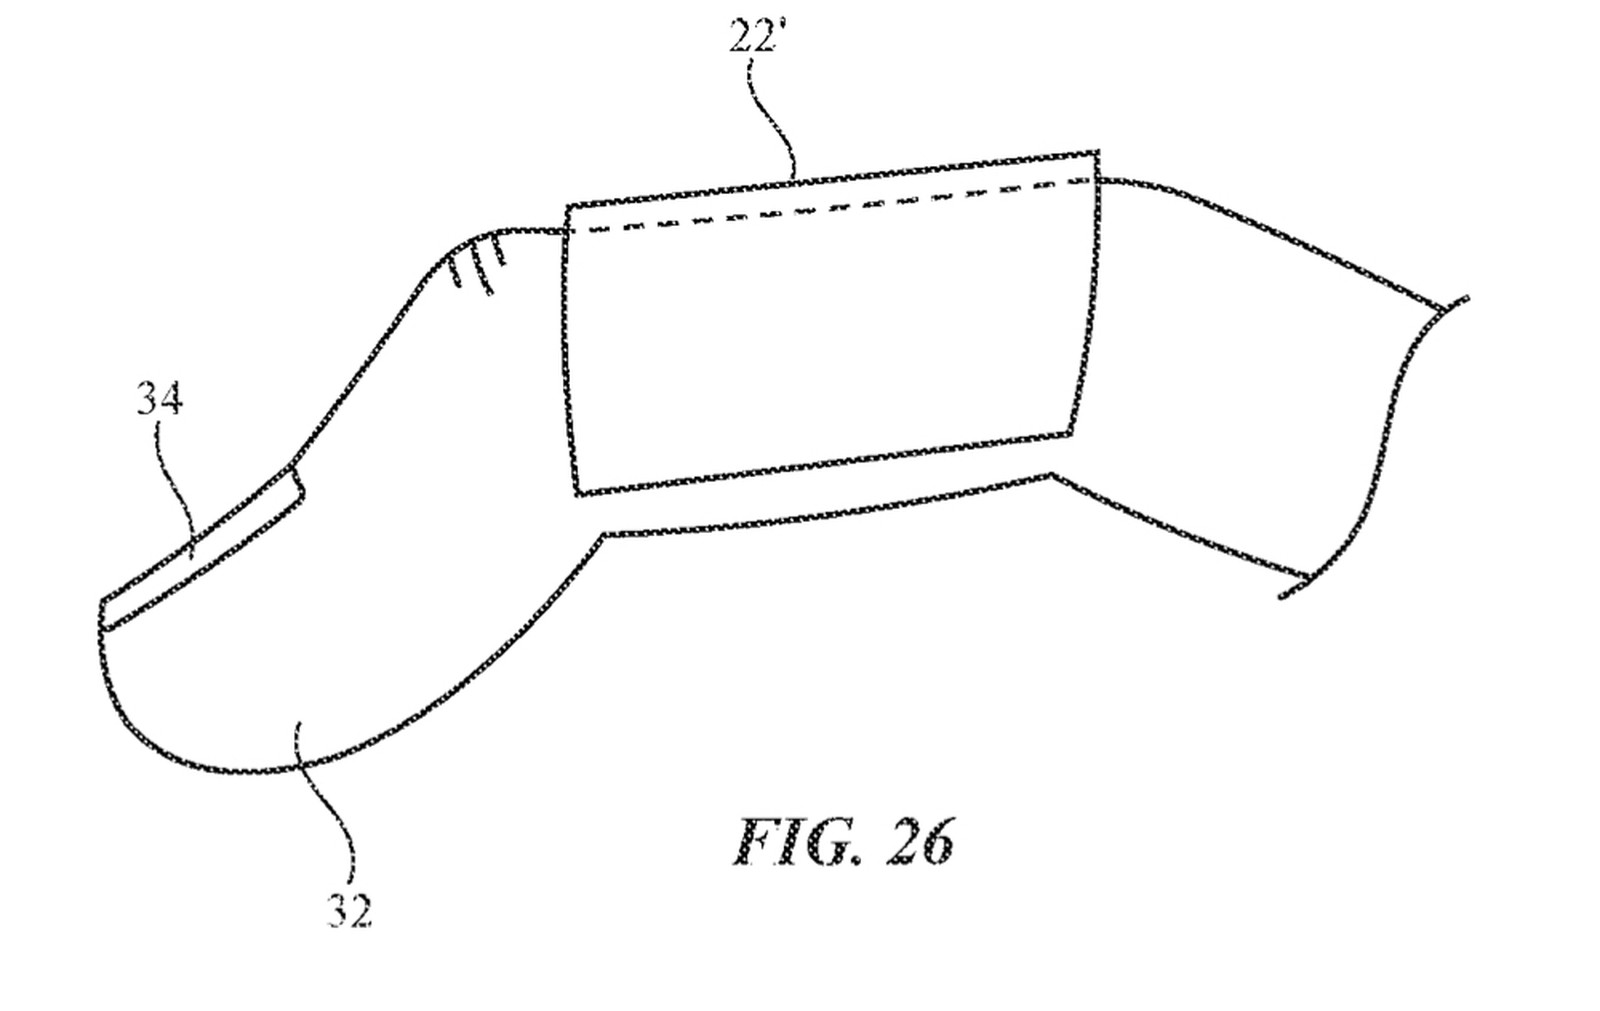 finger-mounted-device-patent-2.jpg